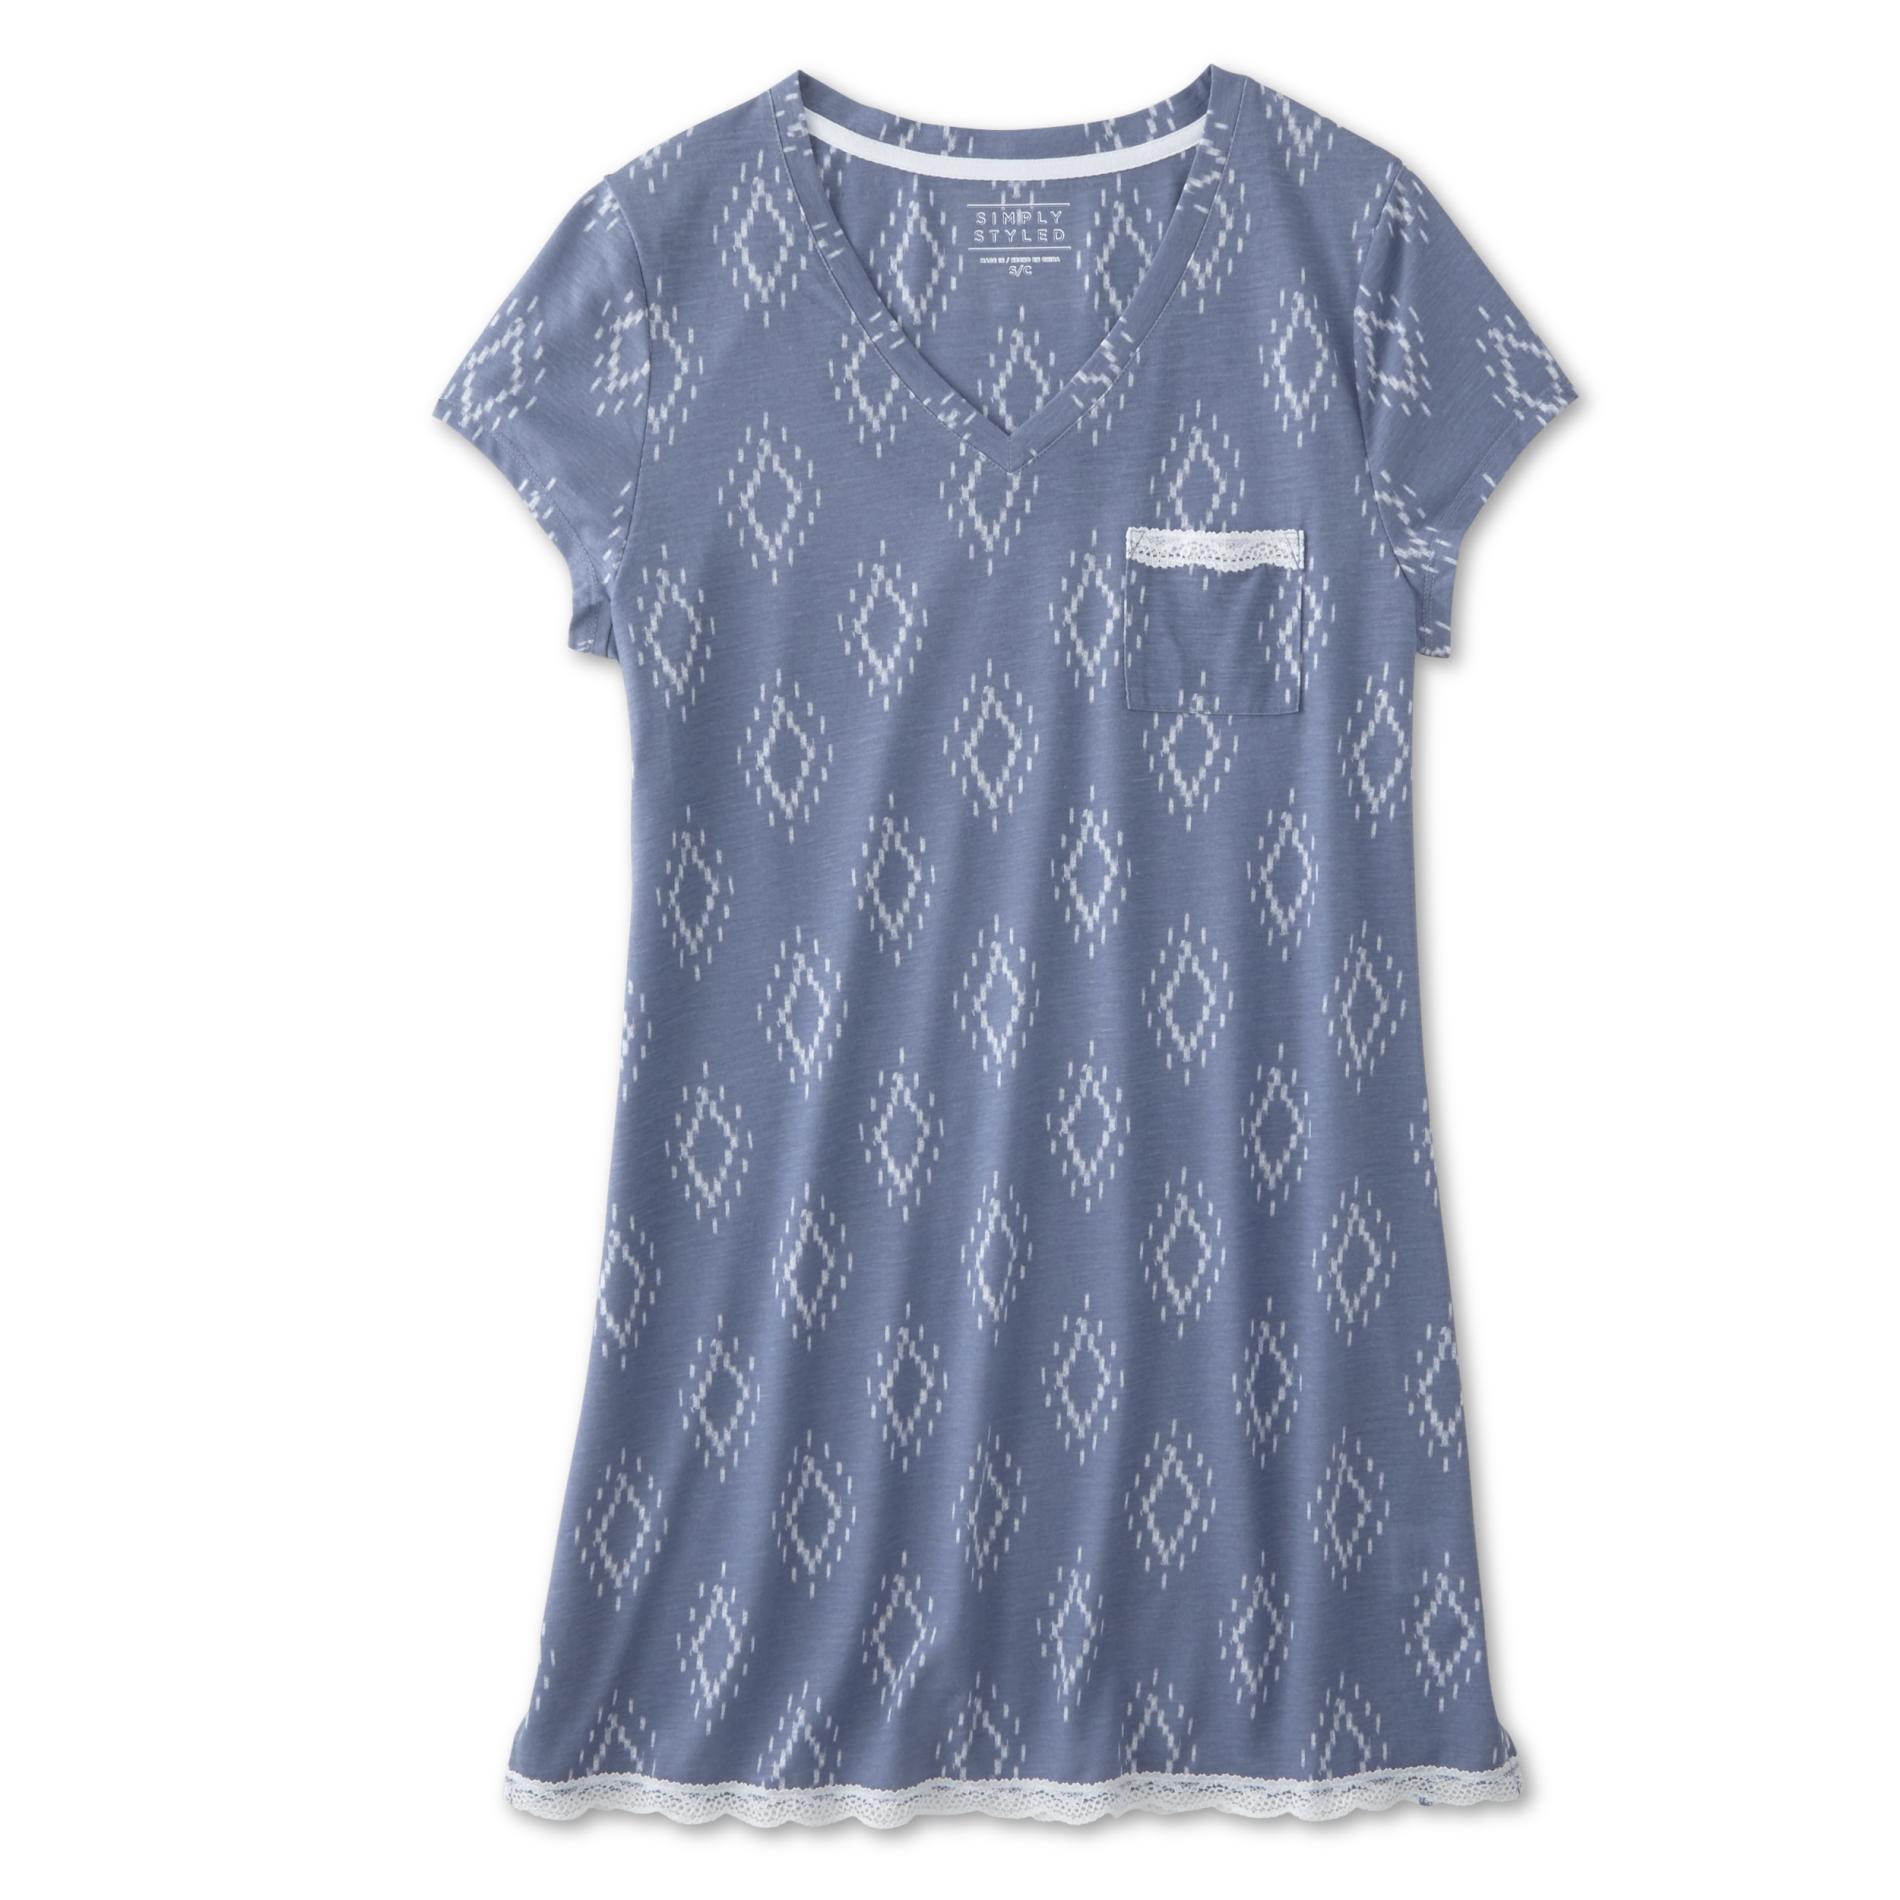 Simply Styled Women's Nightgown - Geometric